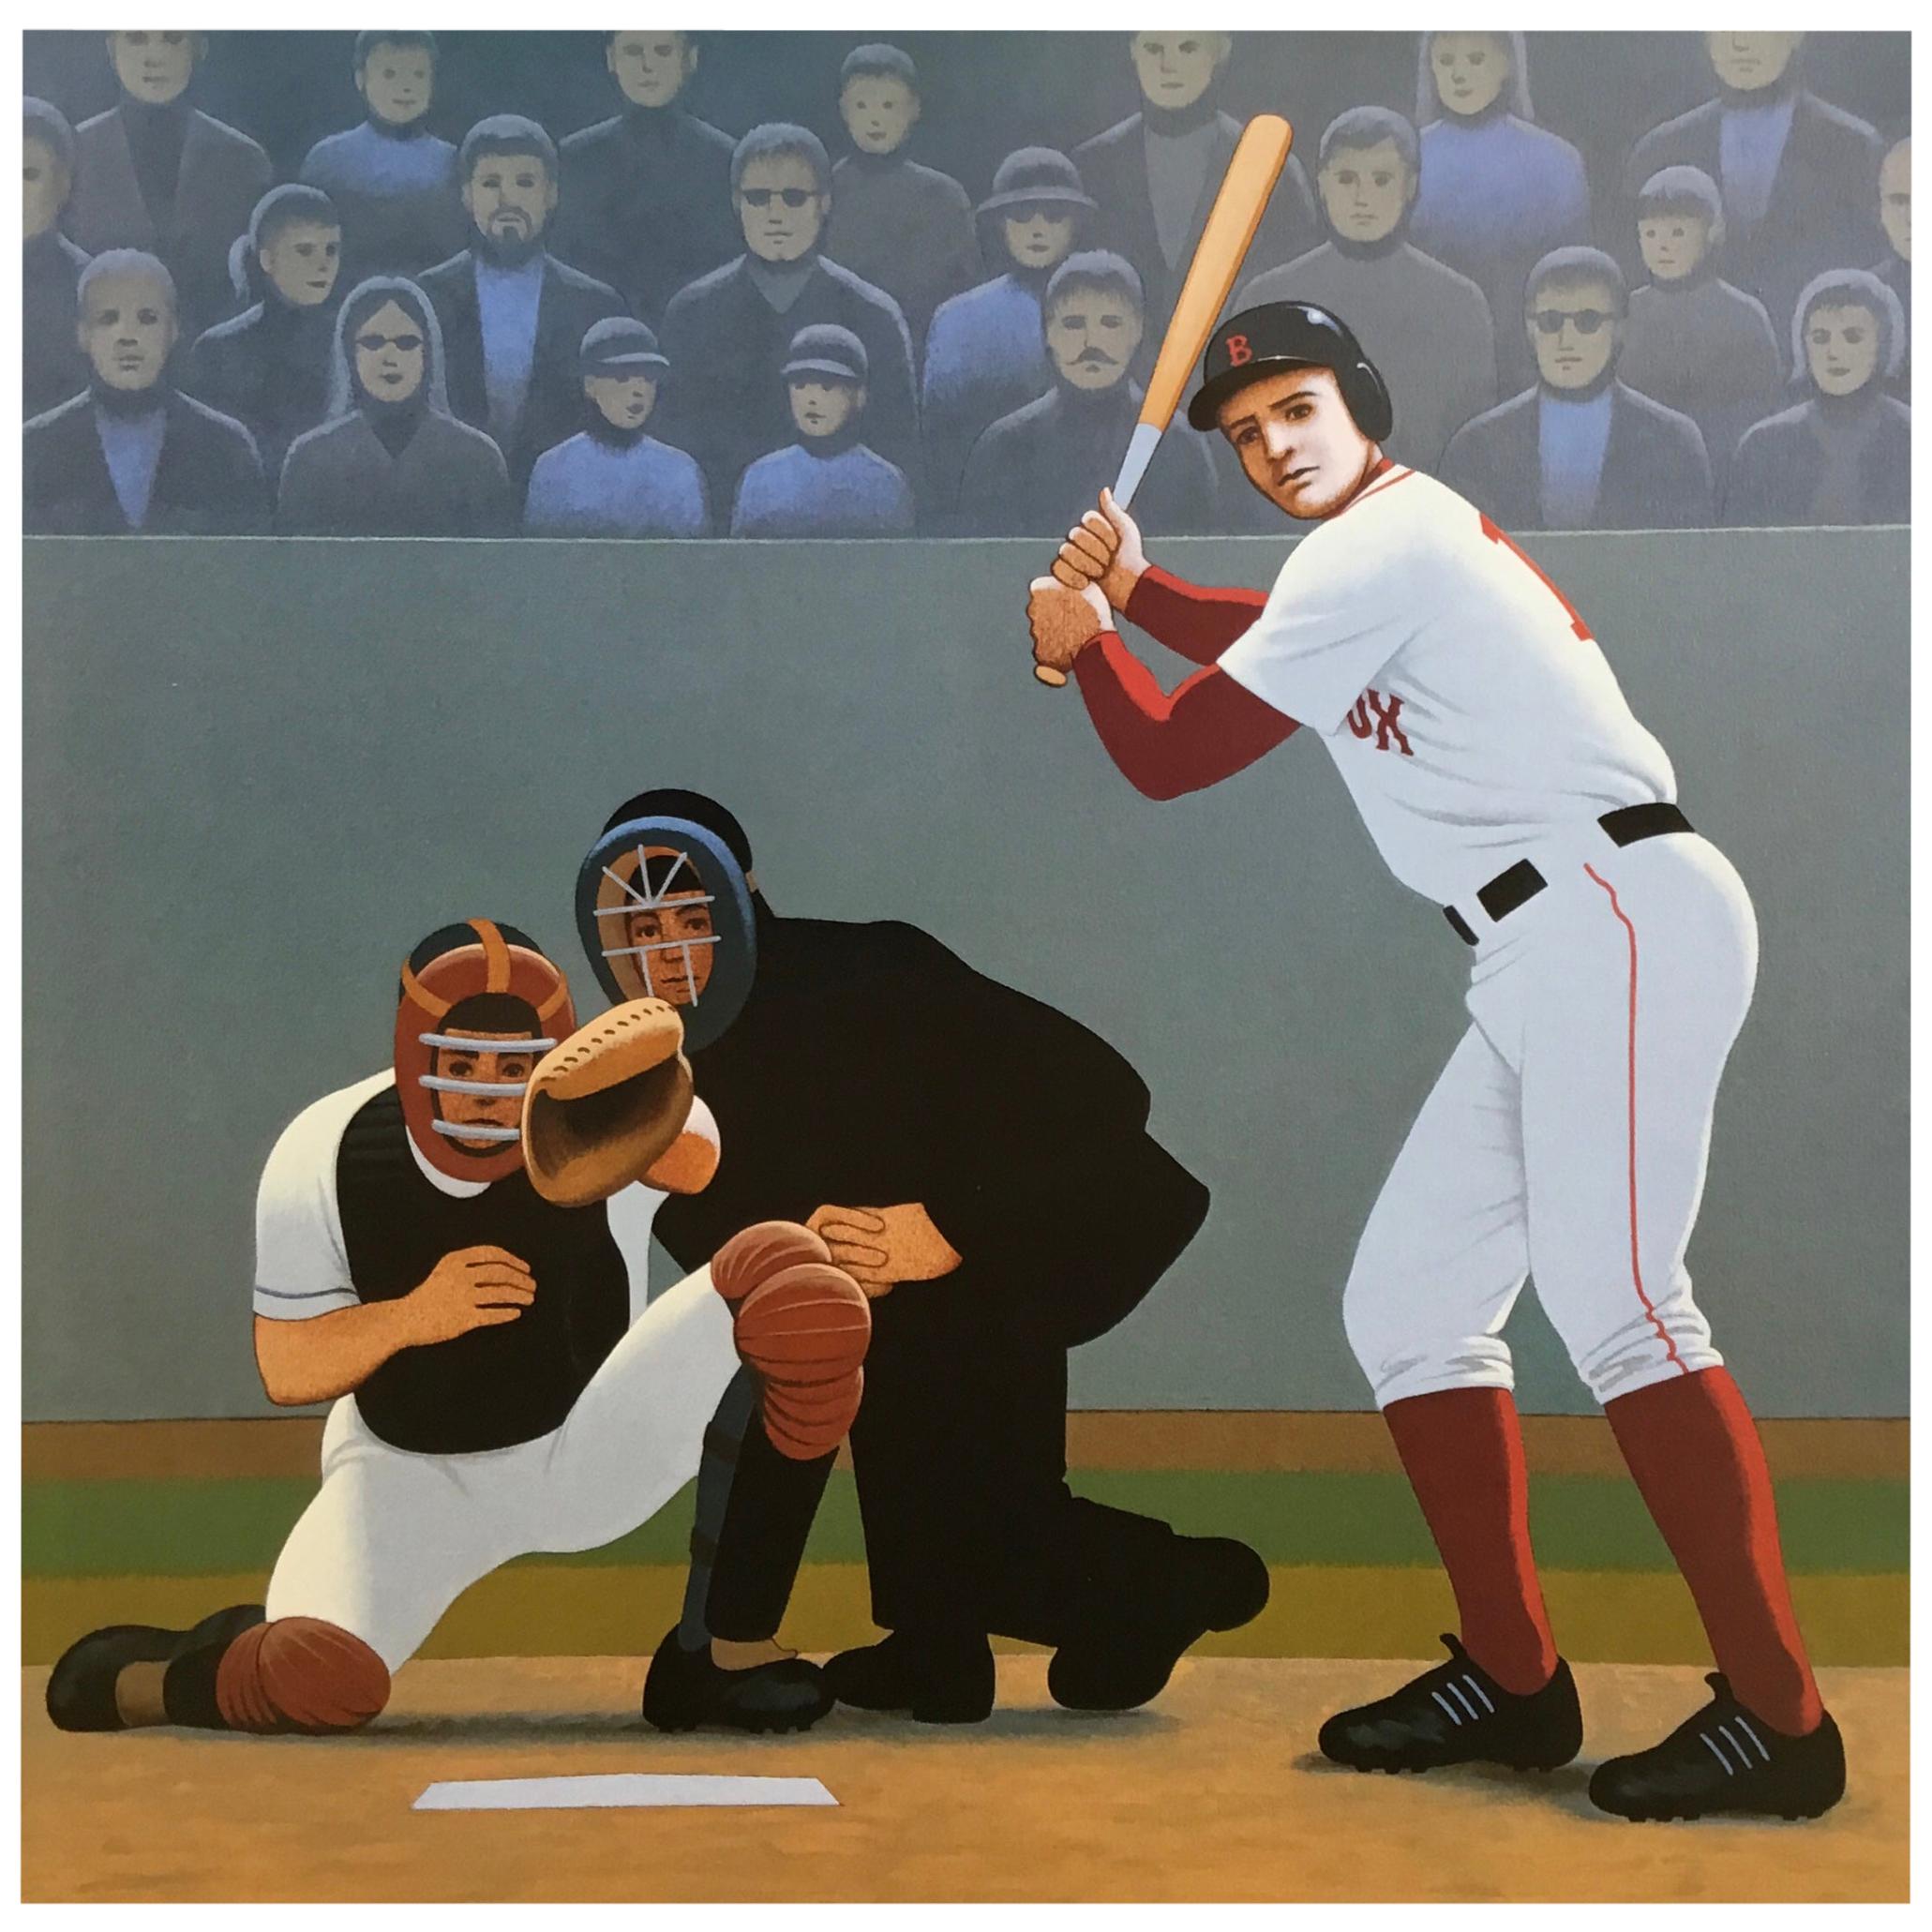 Batter Up at Fenway, Original Painting by Lynn Curlee